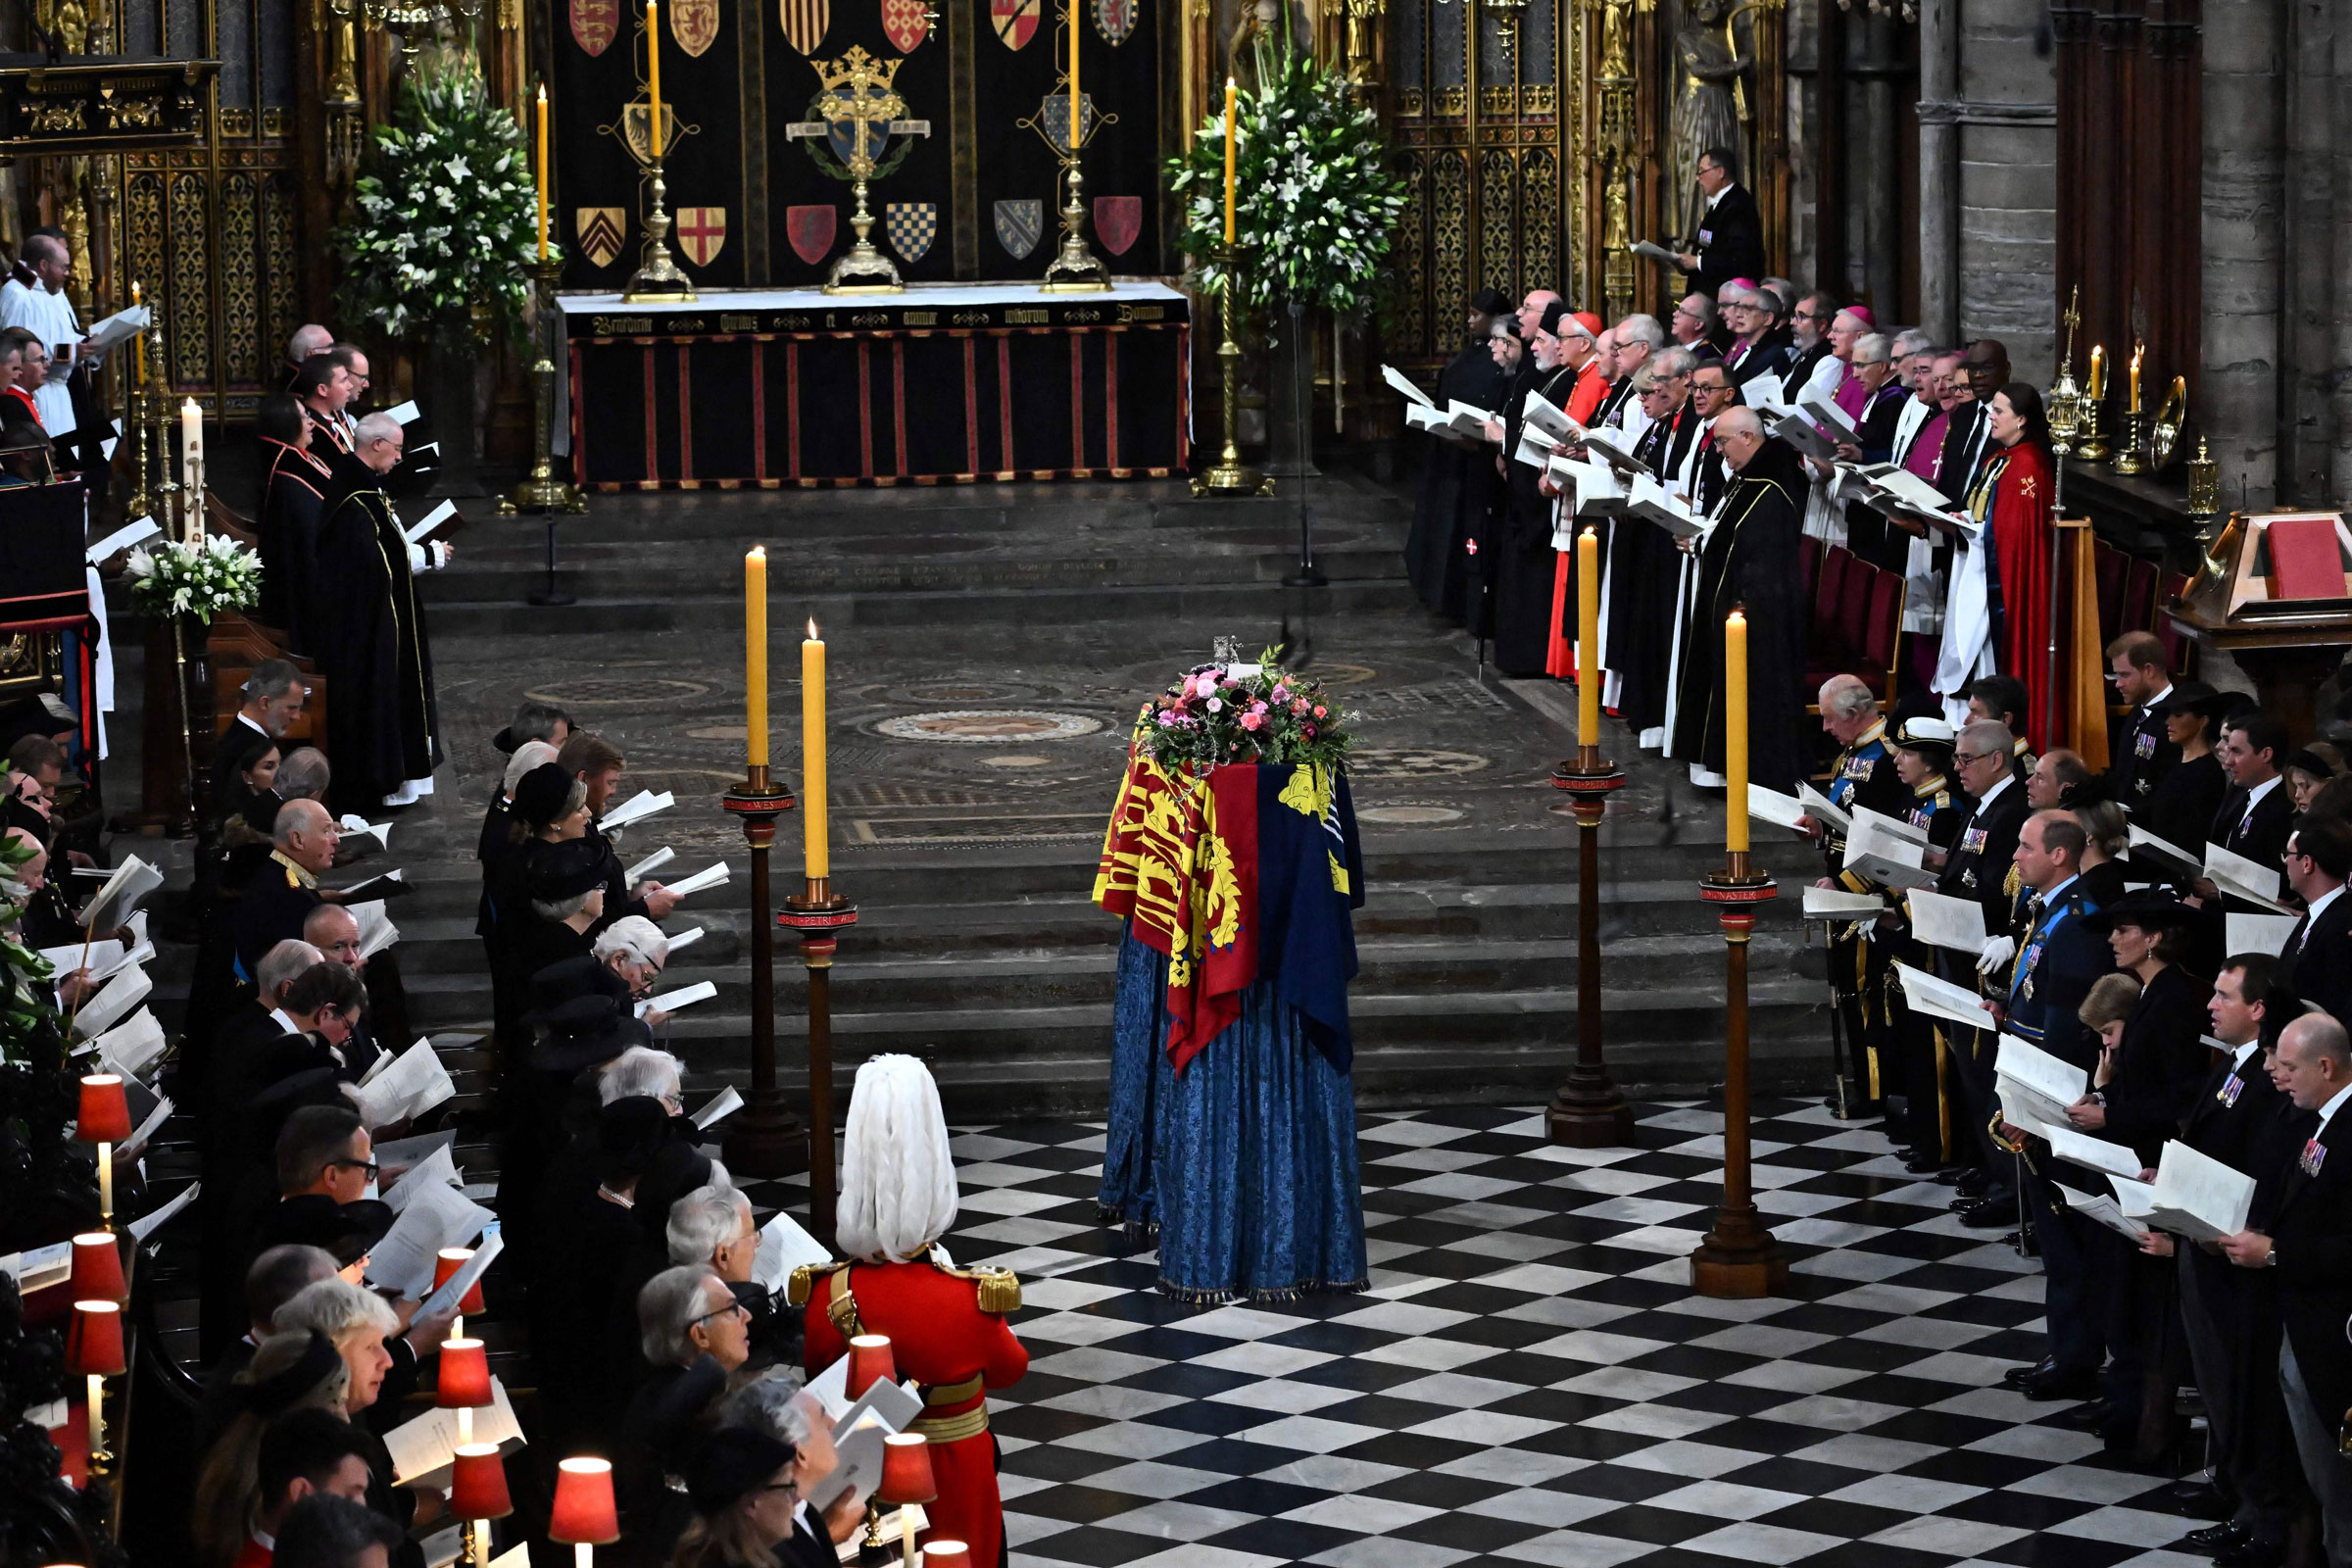 Members of the royal family and guests sing as the coffin of Queen Elizabeth II, draped in the royal standard, lies at the altar during the state funeral service for Queen Elizabeth II at Westminster Abbey in London.  (Ben Stansall—Pool/AFP/Getty Images)